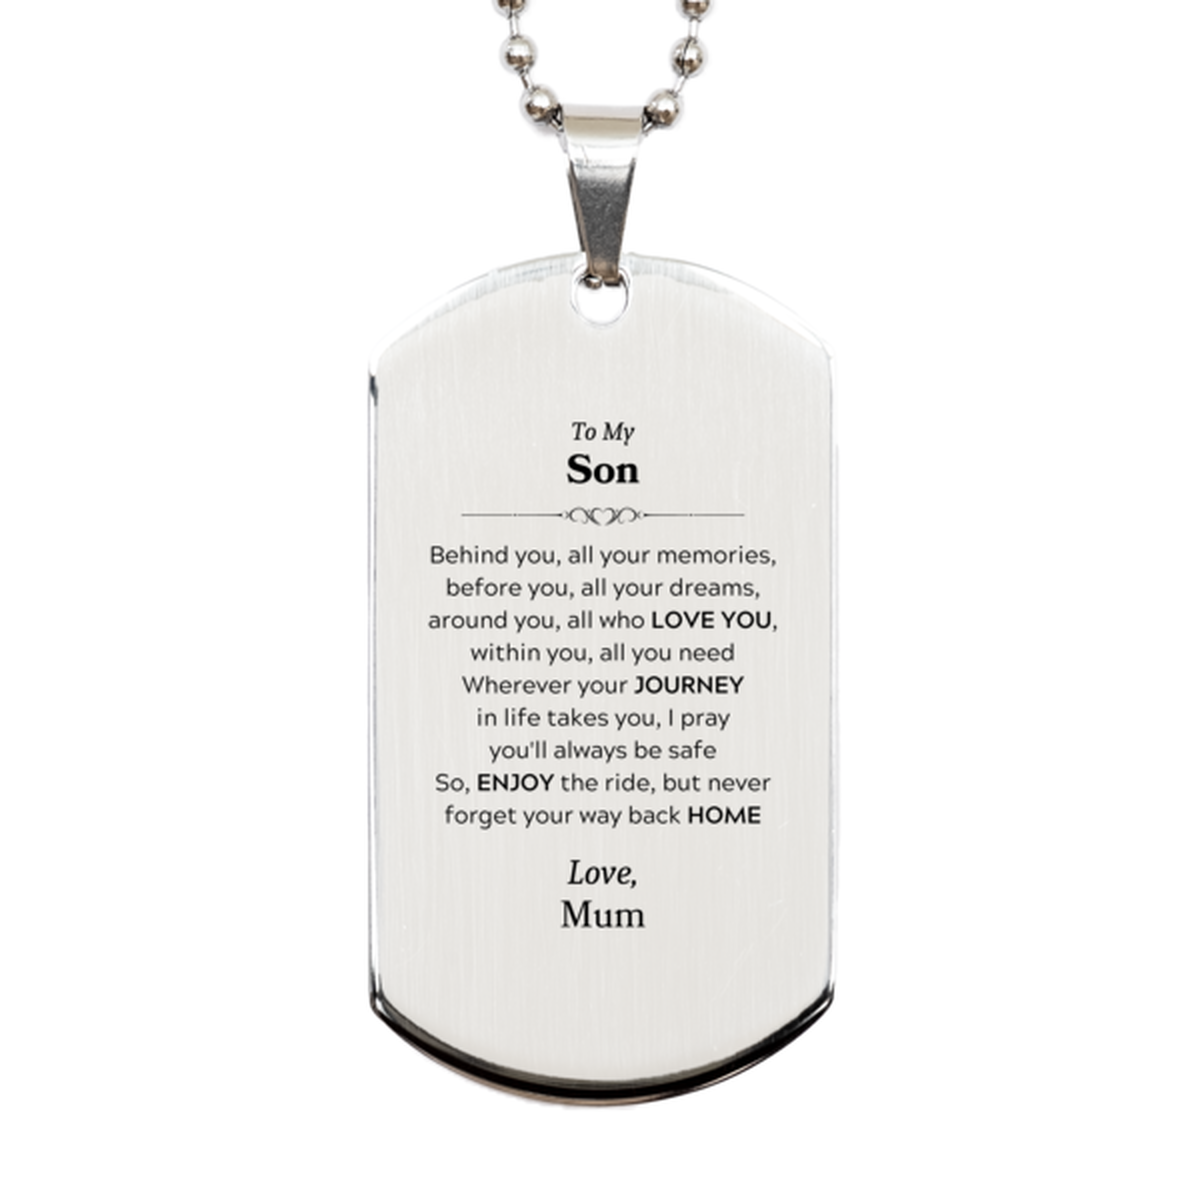 To My Son Graduation Gifts from Mum, Son Silver Dog Tag Christmas Birthday Gifts for Son Behind you, all your memories, before you, all your dreams. Love, Mum